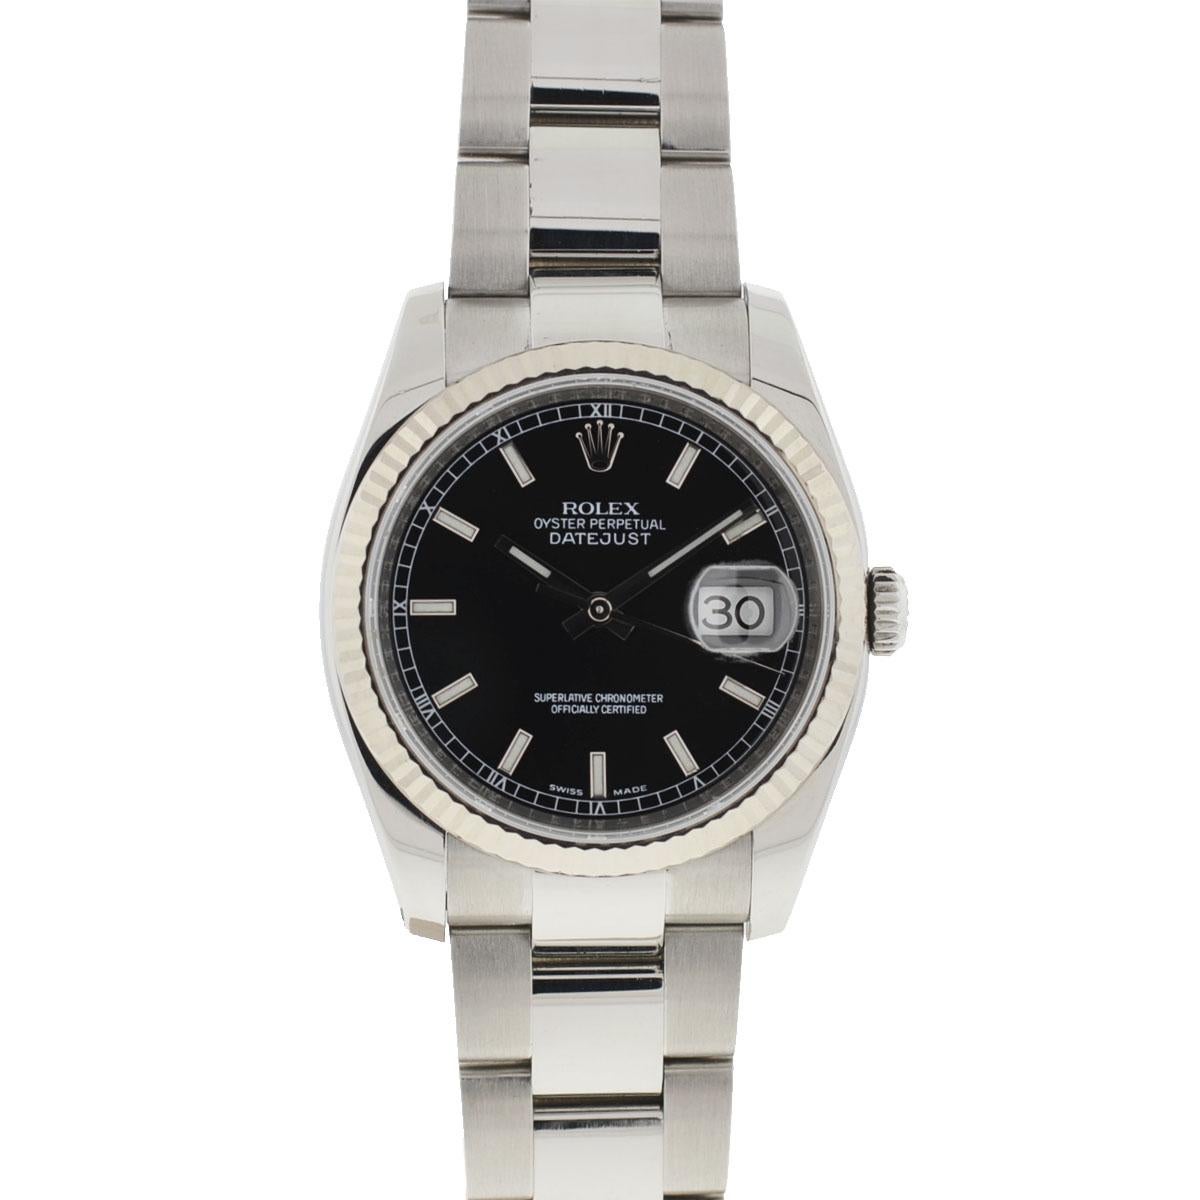 Company - Rolex
Style - Luxury Watch
Model - Datejust
Reference Number - 116234
Case Metal - Stainless Steel
Case Measurement - 36 mm
Bracelet - Stainless Steel - Fits up to a 7